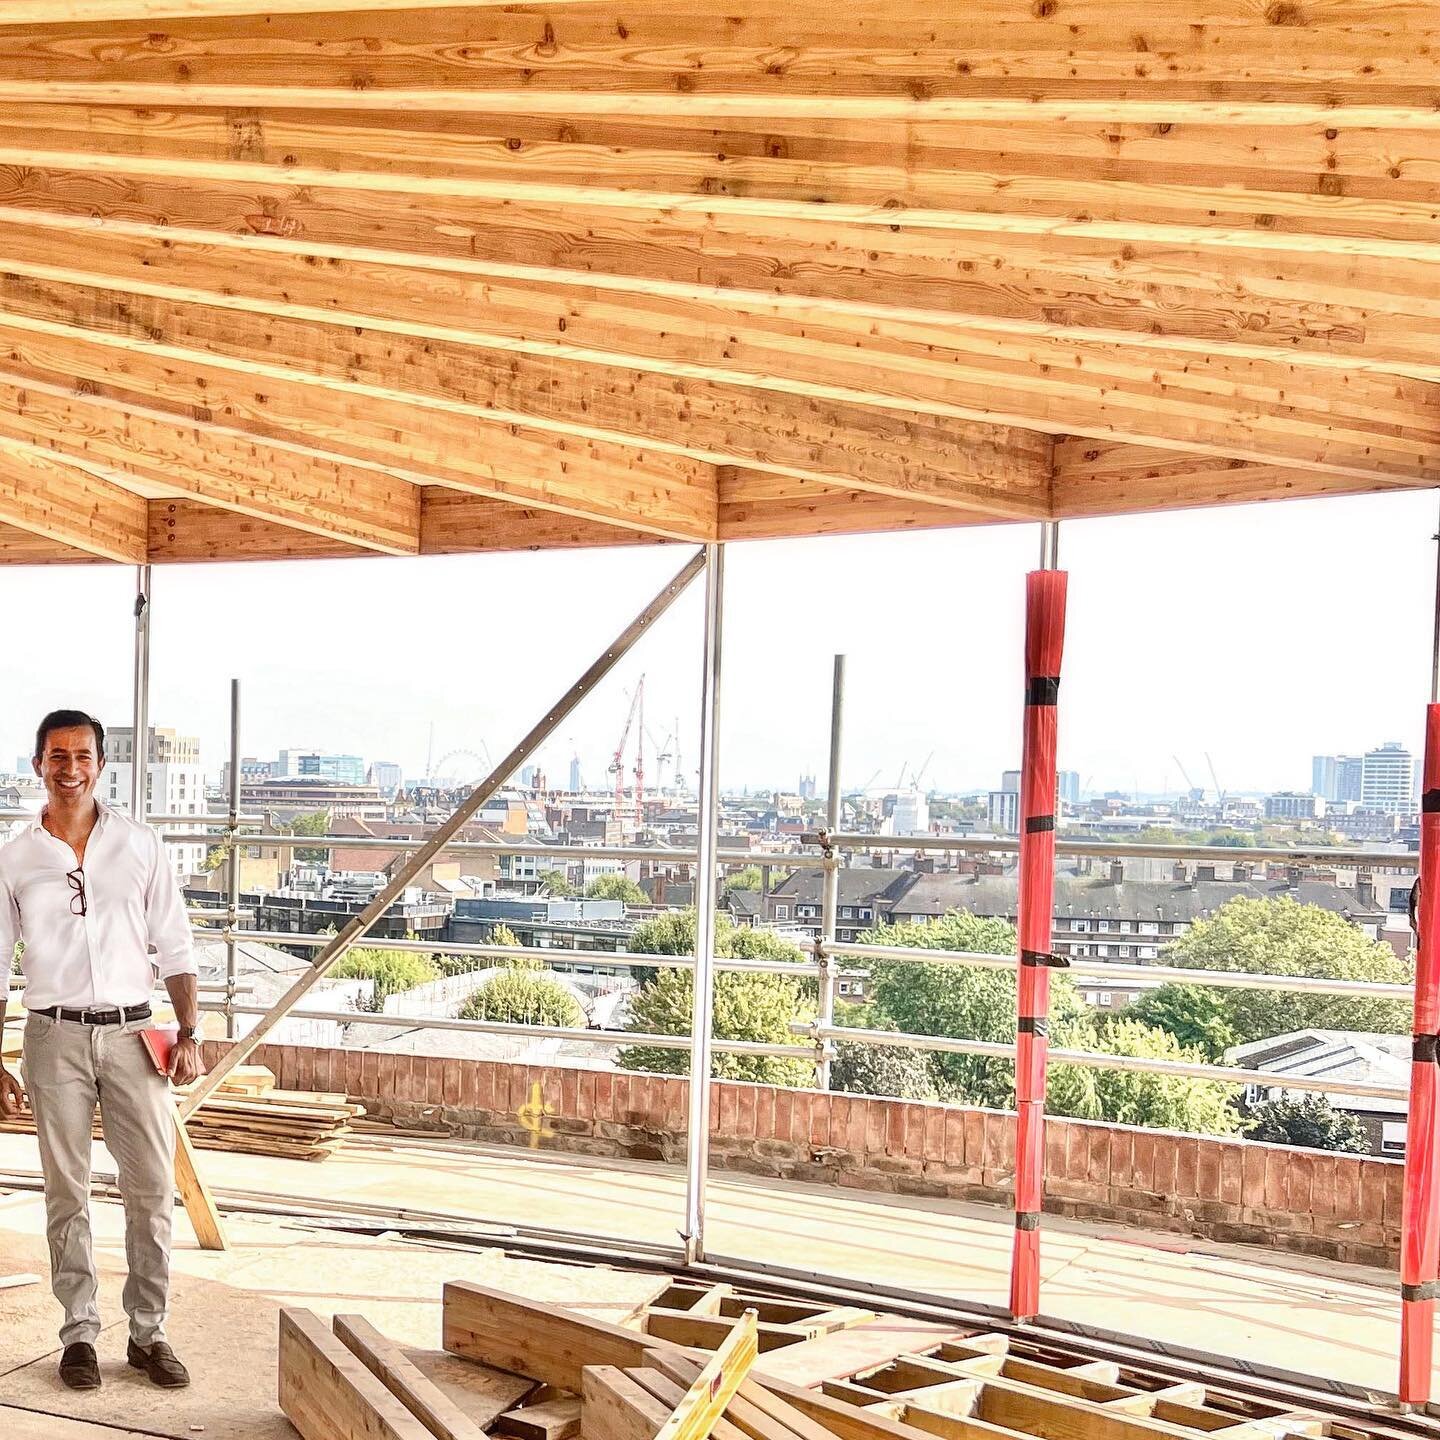 Works at Round House NW8 are progressing well - the glulam roof over bespoke SS post are ready to receive  the glazing elements. The curved roof frames these arresting panoramic views of West London. Completion expected early 2024 - watch this space!